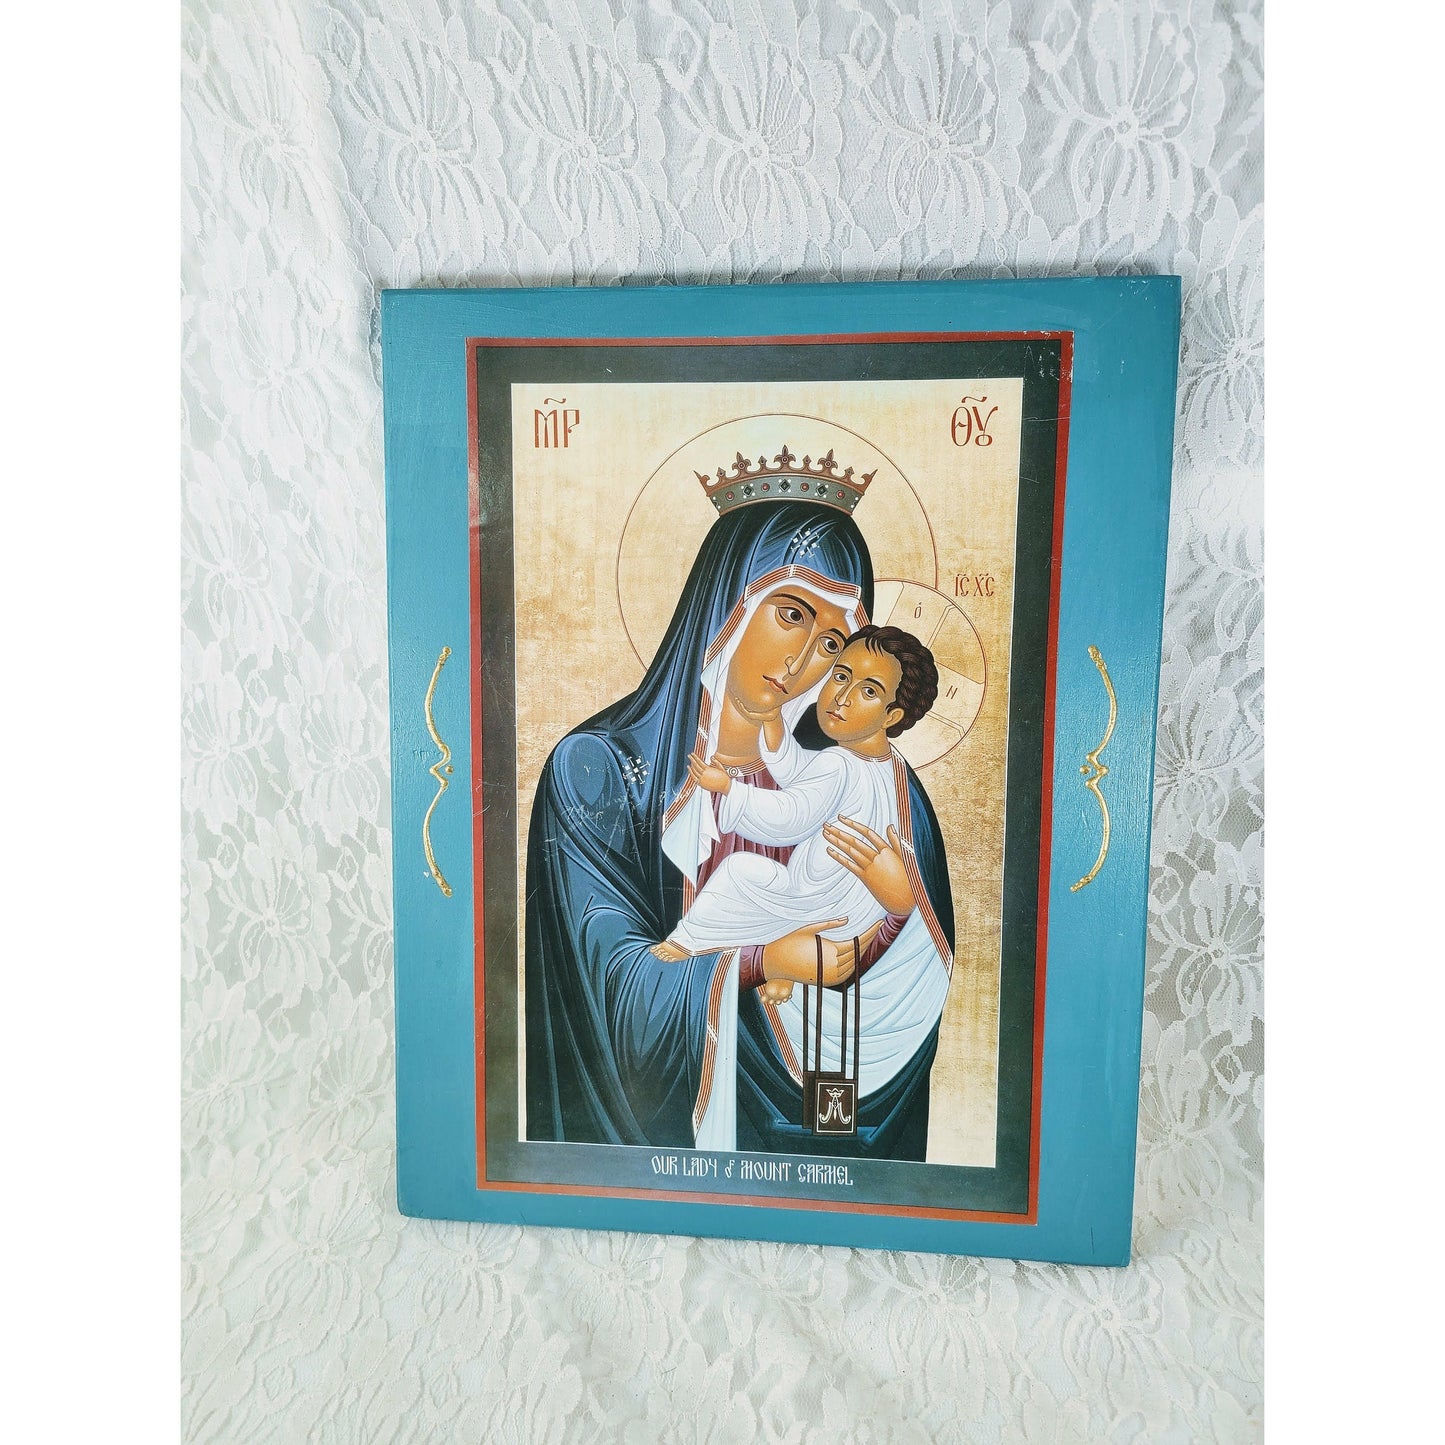 Vintage Russian Greek Orthodox Icon Wood Icon ~ Wall Hanging ~ Our Lady of Mount Carmel ~ Large 10 by 13"